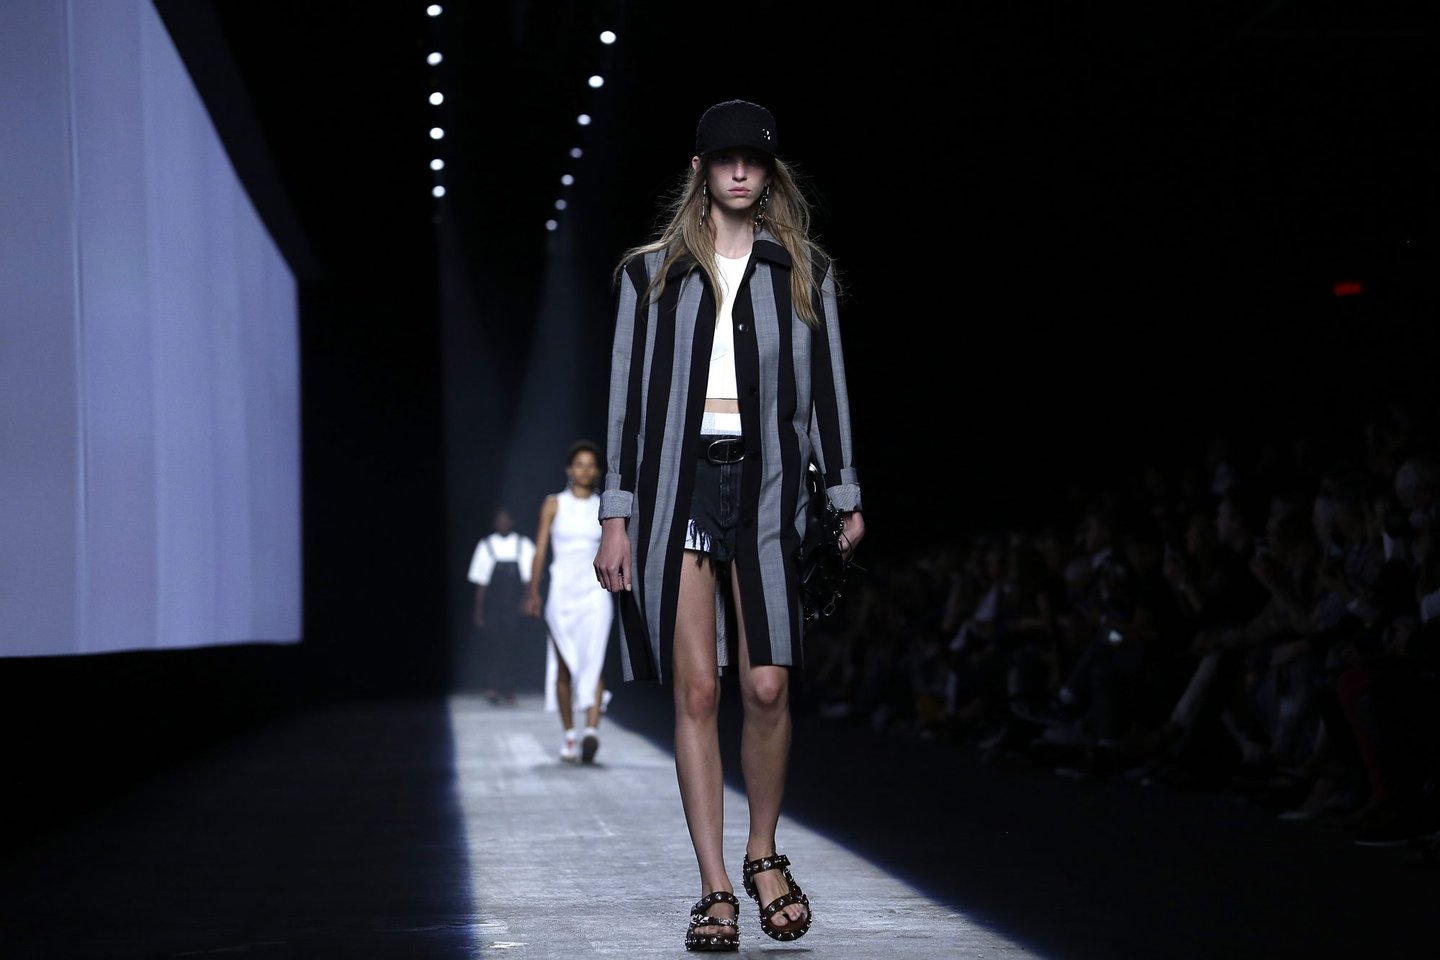 A model presents a creation from the Alexander Wang Spring/Summer 2016 collection at the New York Fashion Week on September 12, 2015 in New York. AFP PHOTO/Joshua Lott (Photo credit should read Joshua LOTT/AFP/Getty Images)